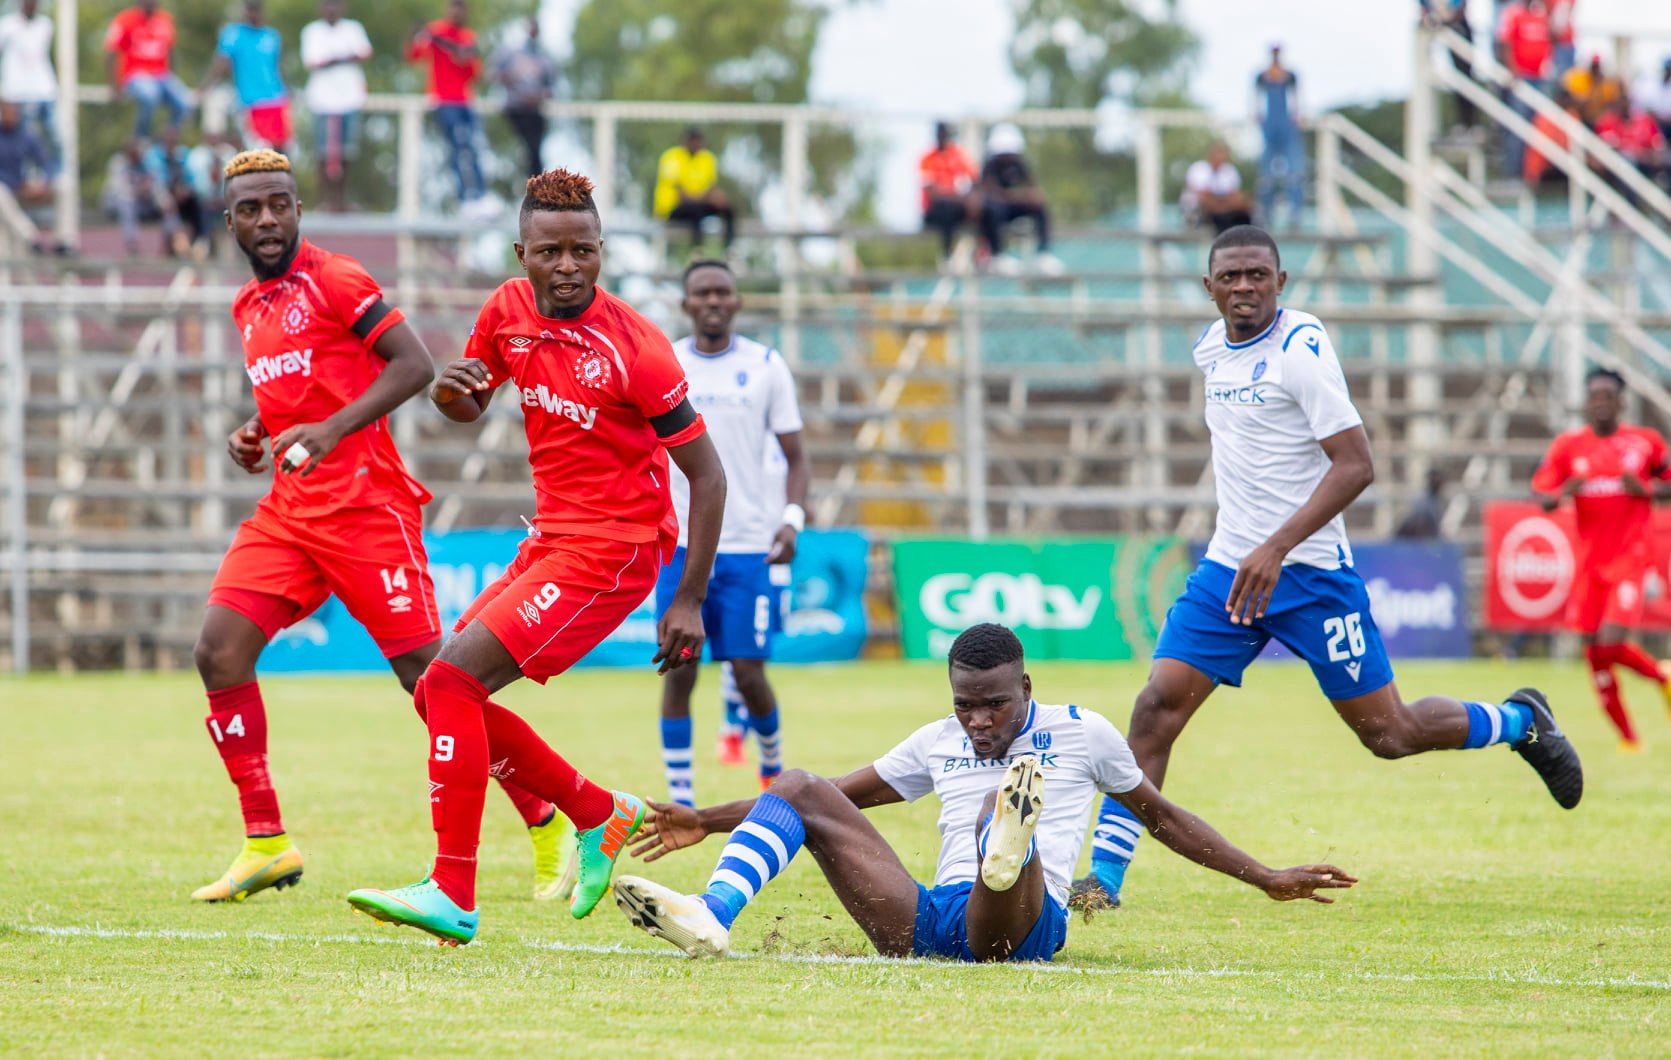 Nkana FC Win 5-4 & Qualify For The Semi-Finals In ABSA Cup